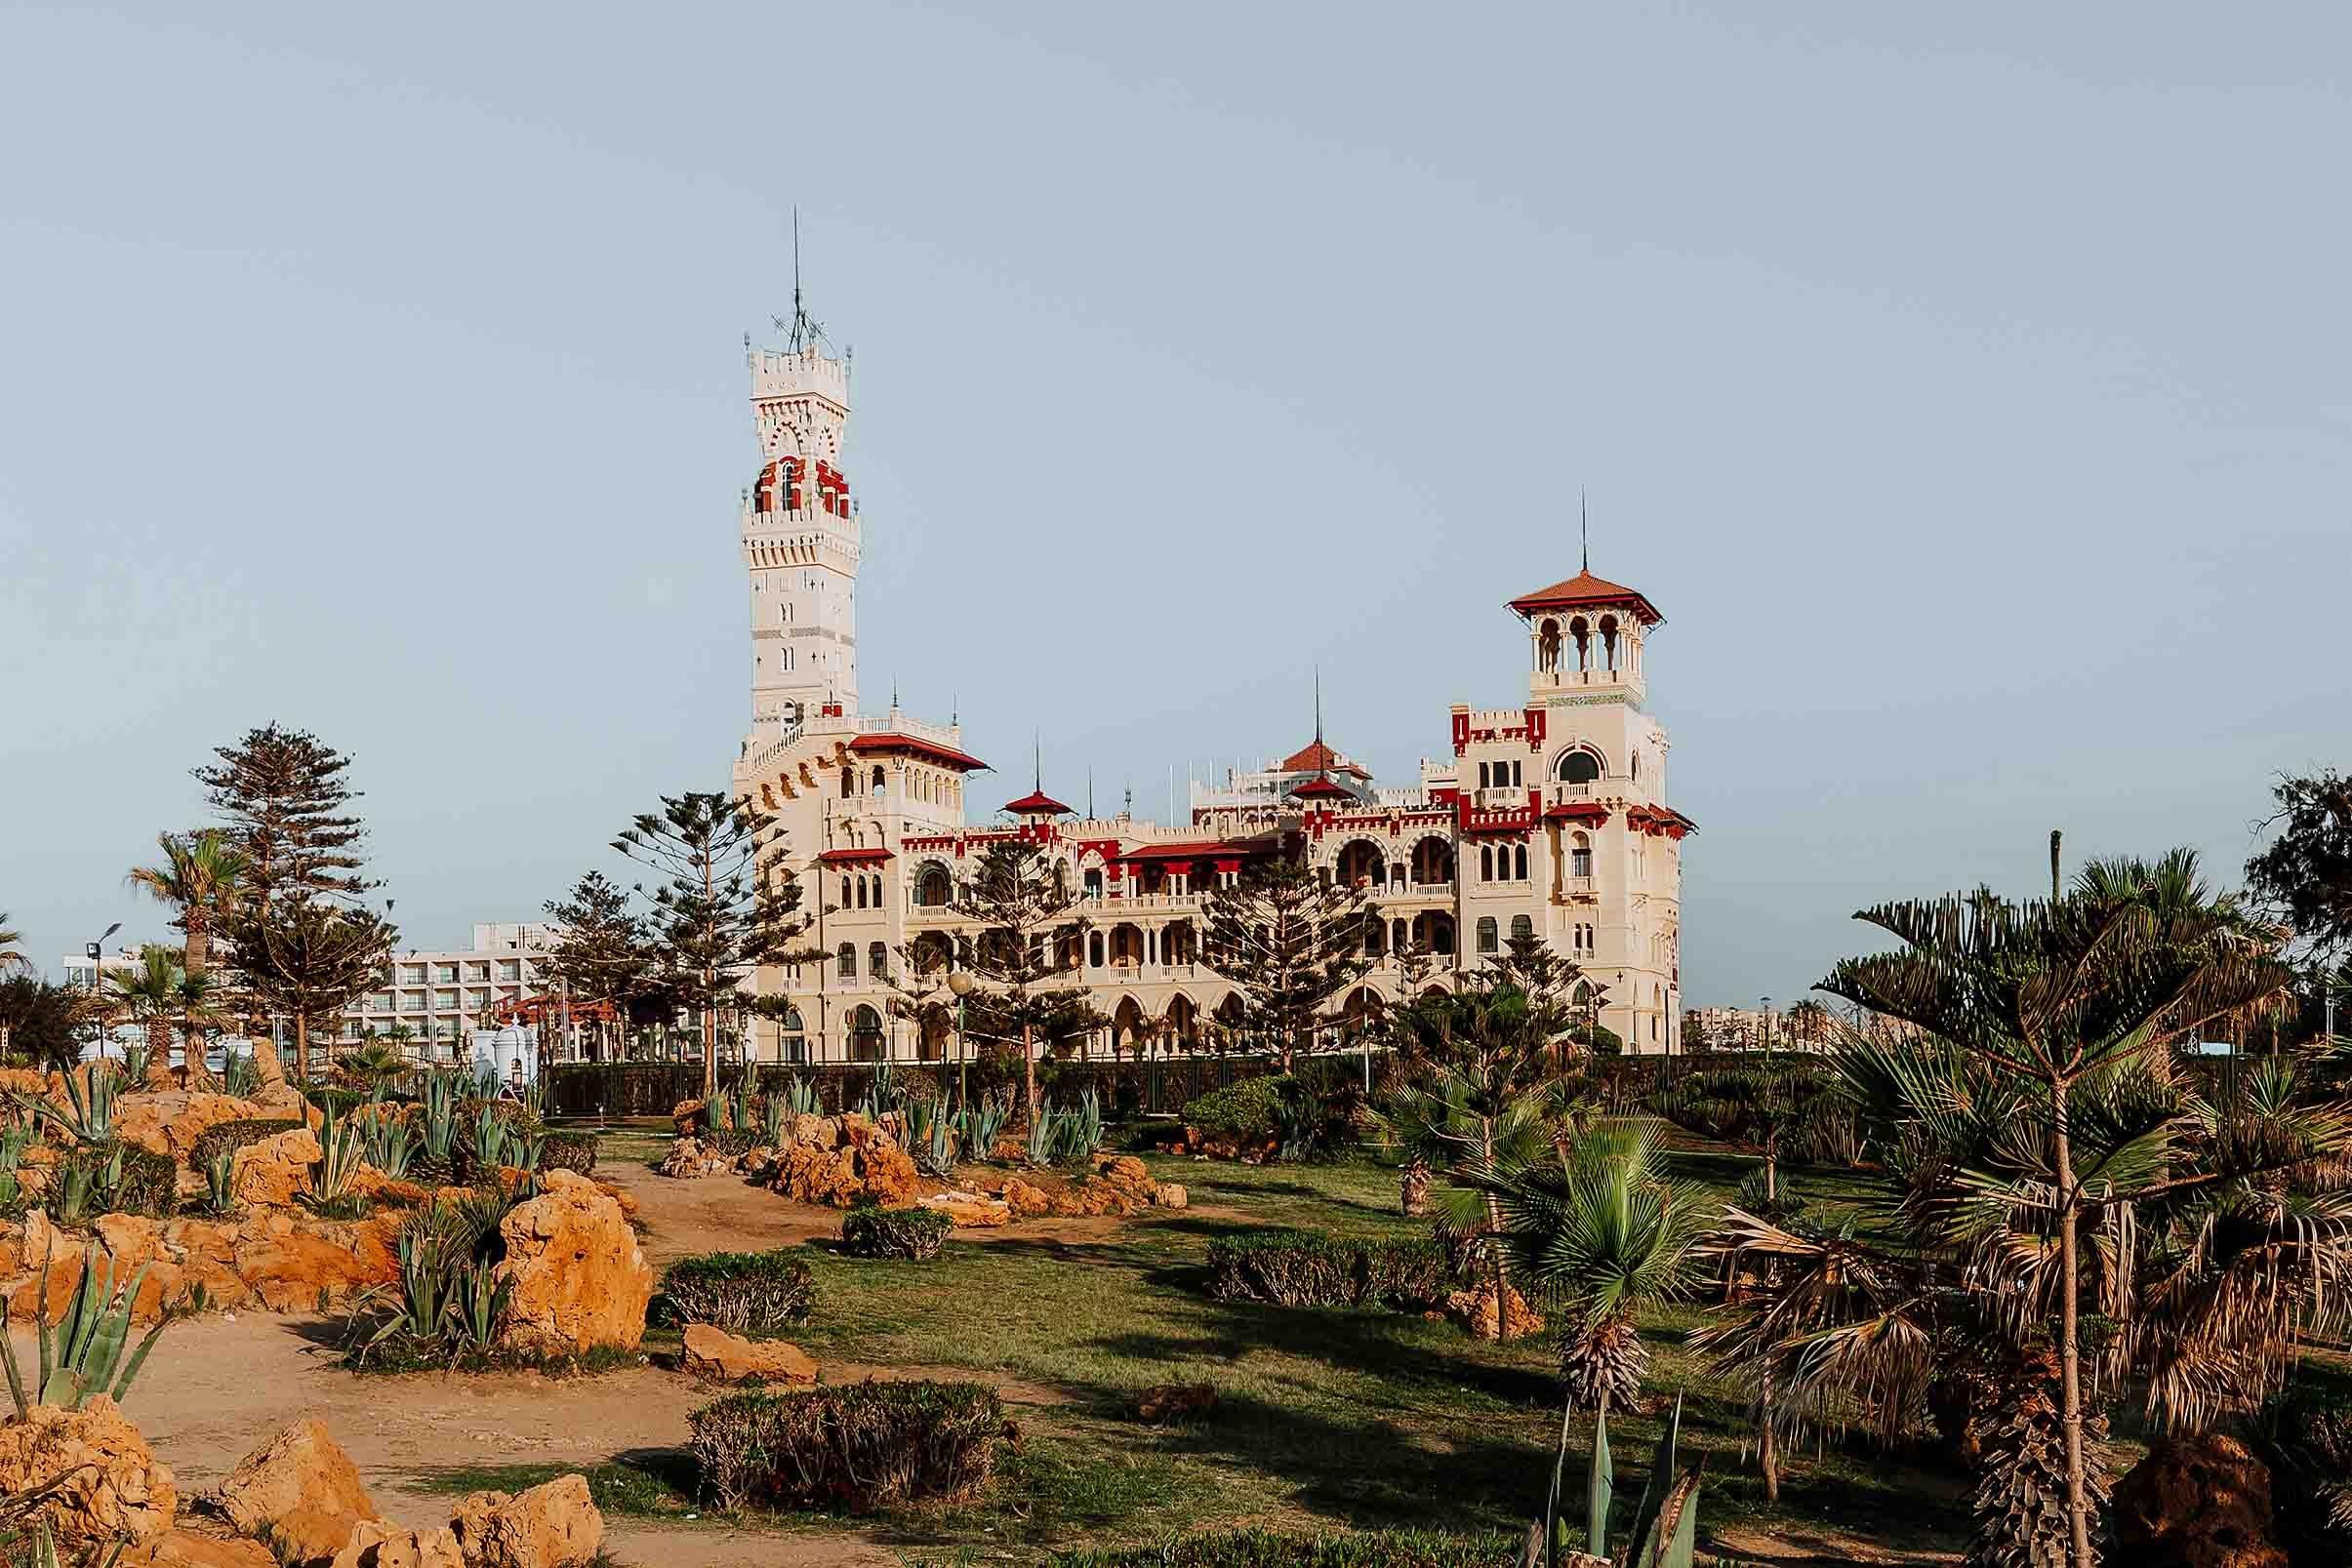 Royal palace at Montaza public park in Alexandria on a 8 day Egypt tour itinerary